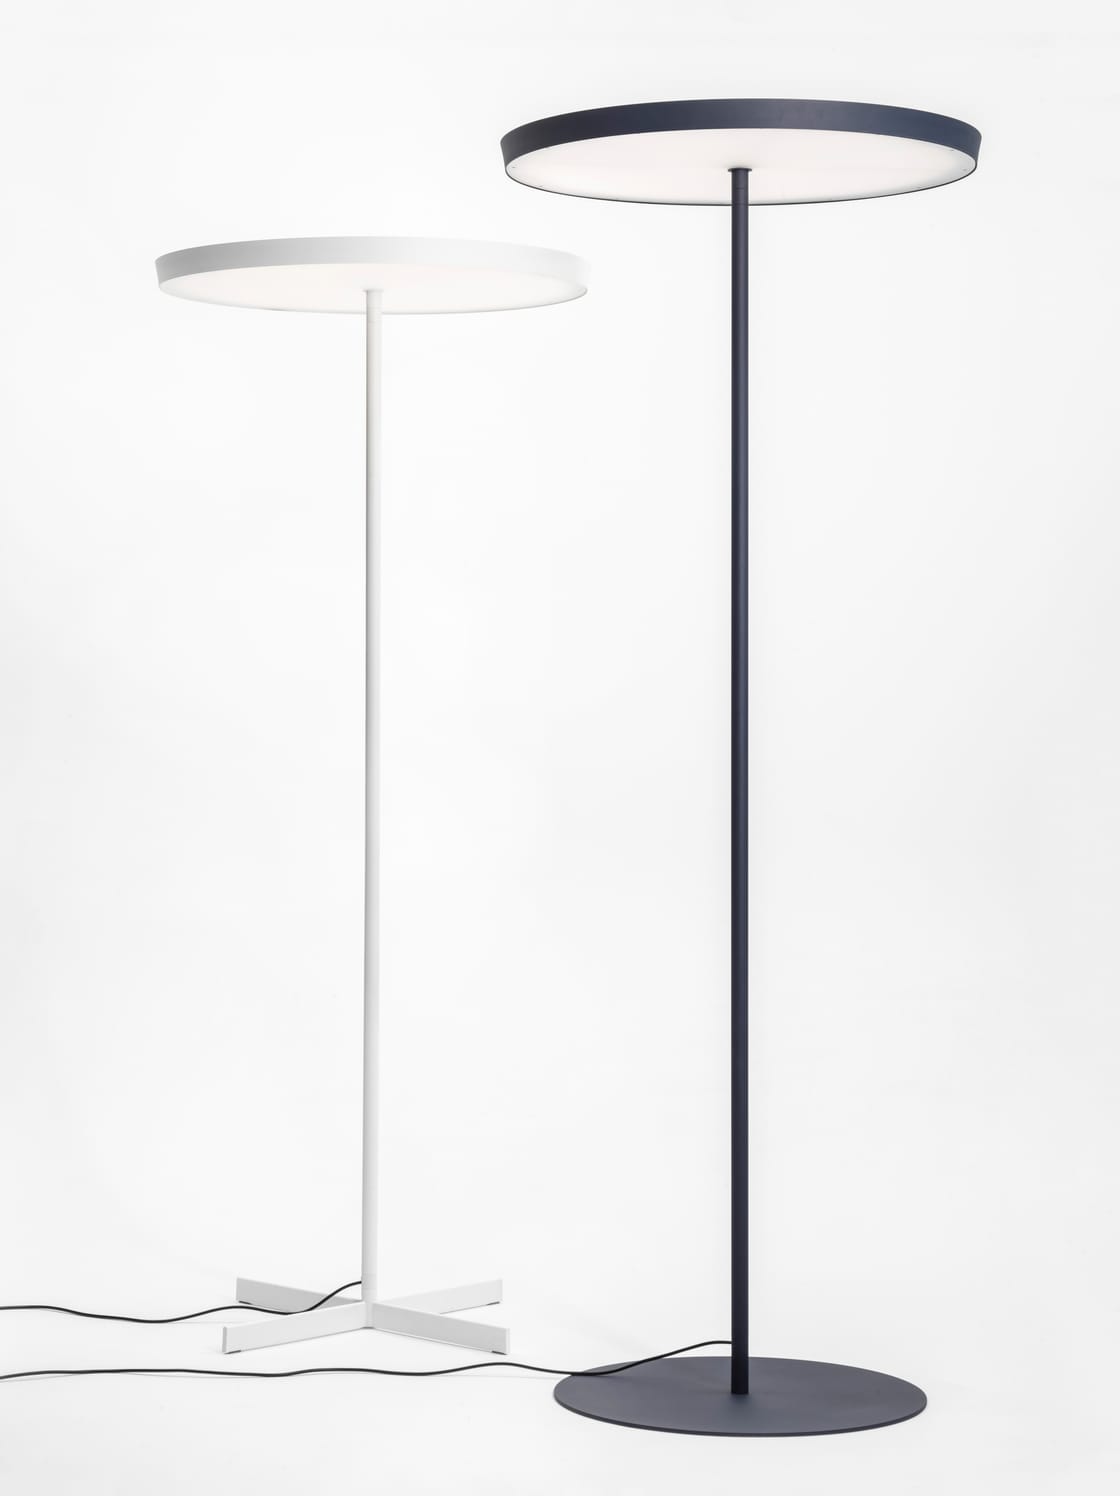 CIRCULAR F 900 floor standing lamp for high spaces